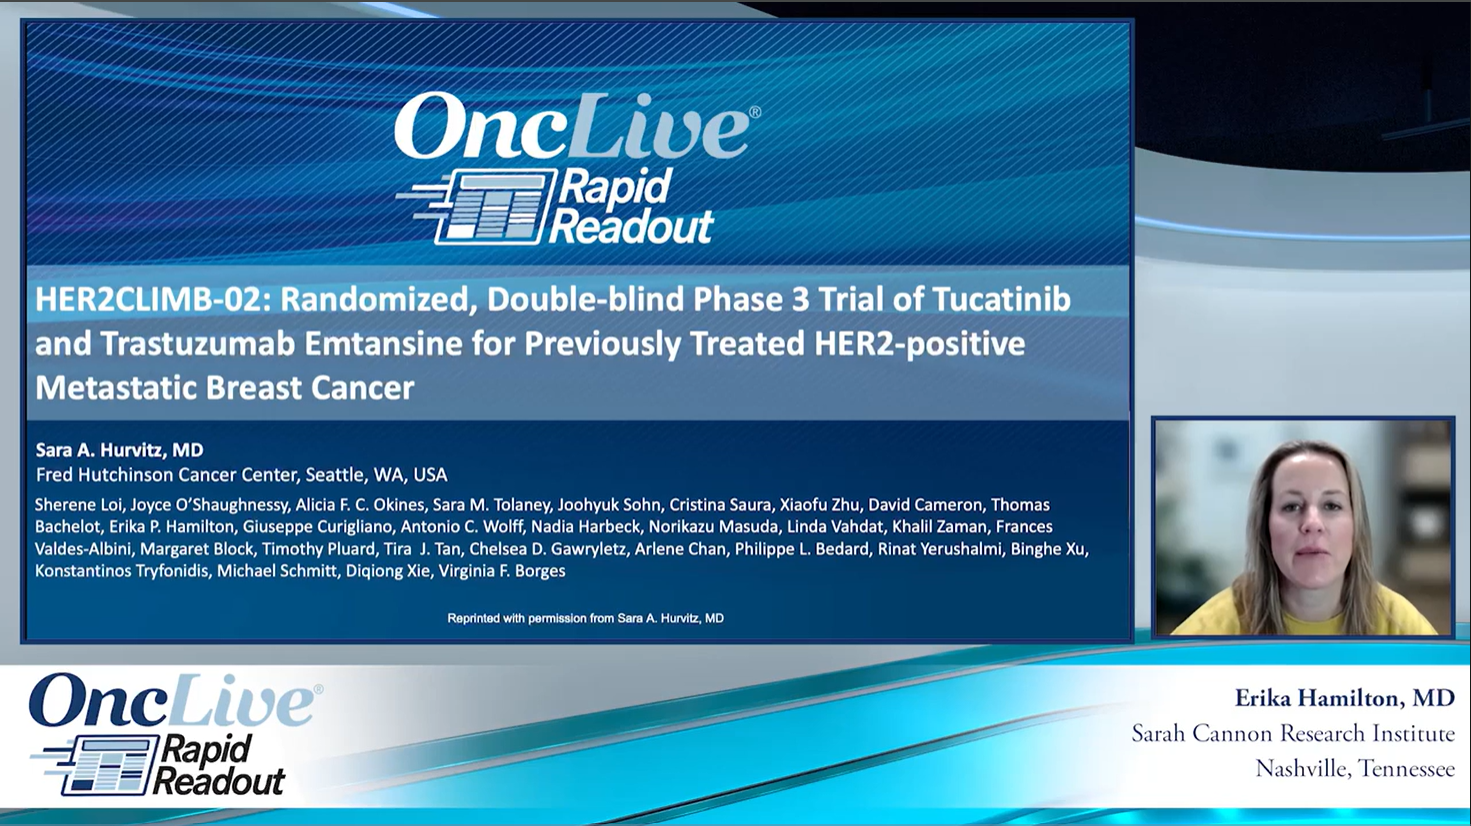 HER2CLIMB-02: Randomized, Double-blind Phase 3 Trial of Tucatinib and Trastuzumab Emtansine for Previously Treated HER2-positive Metastatic Breast Cancer